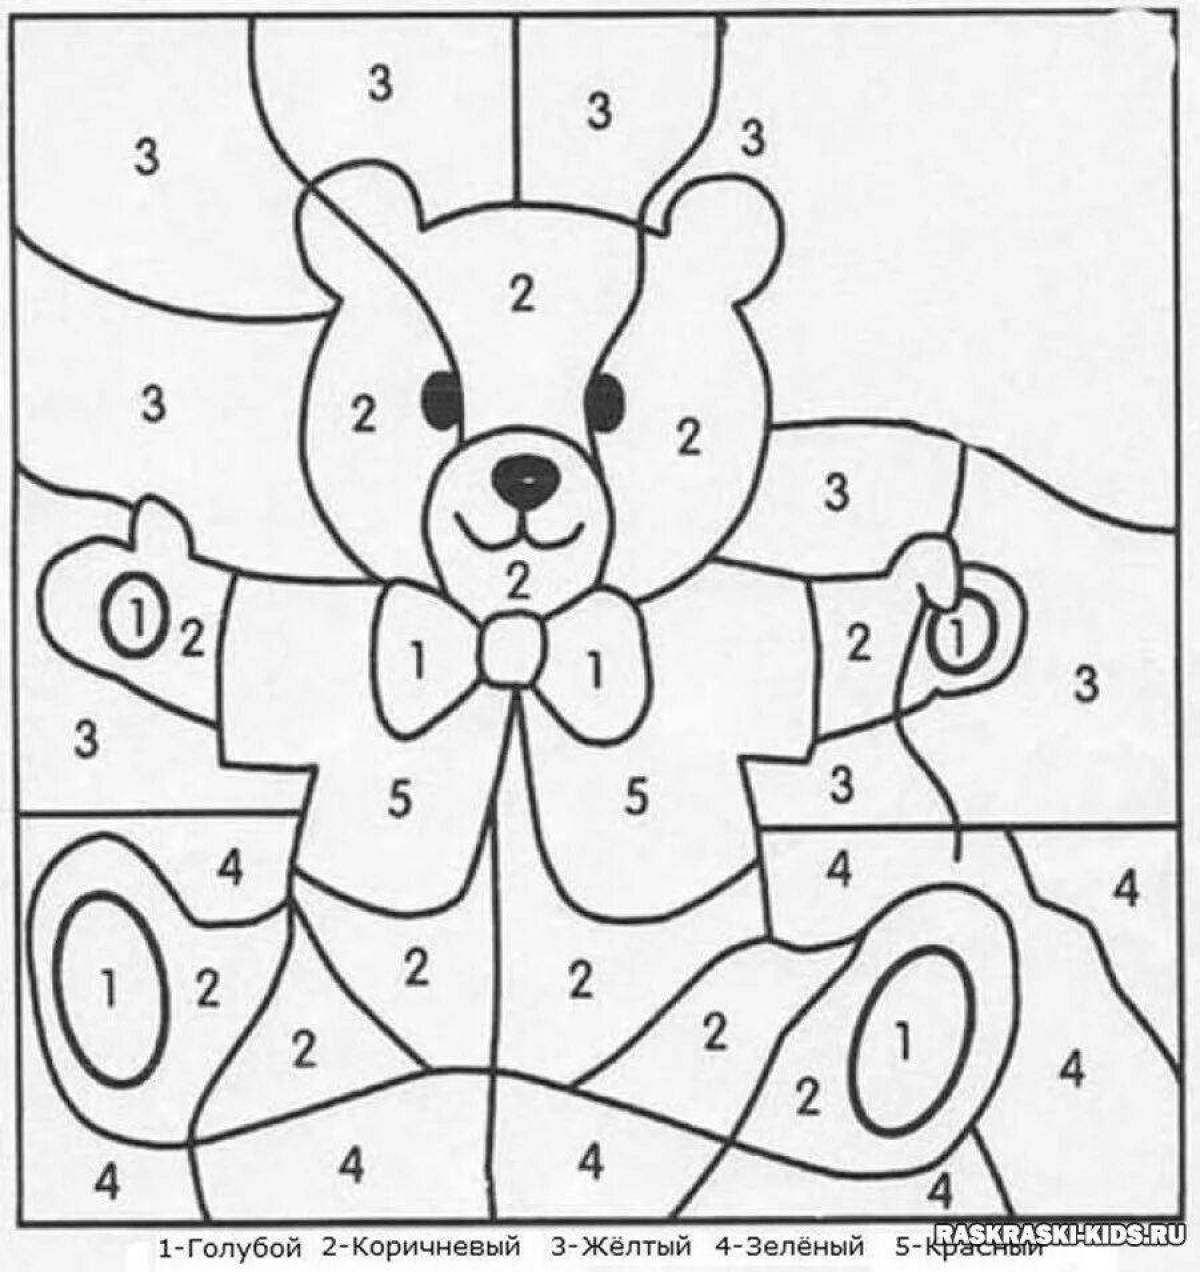 Bright 6 years old coloring by numbers